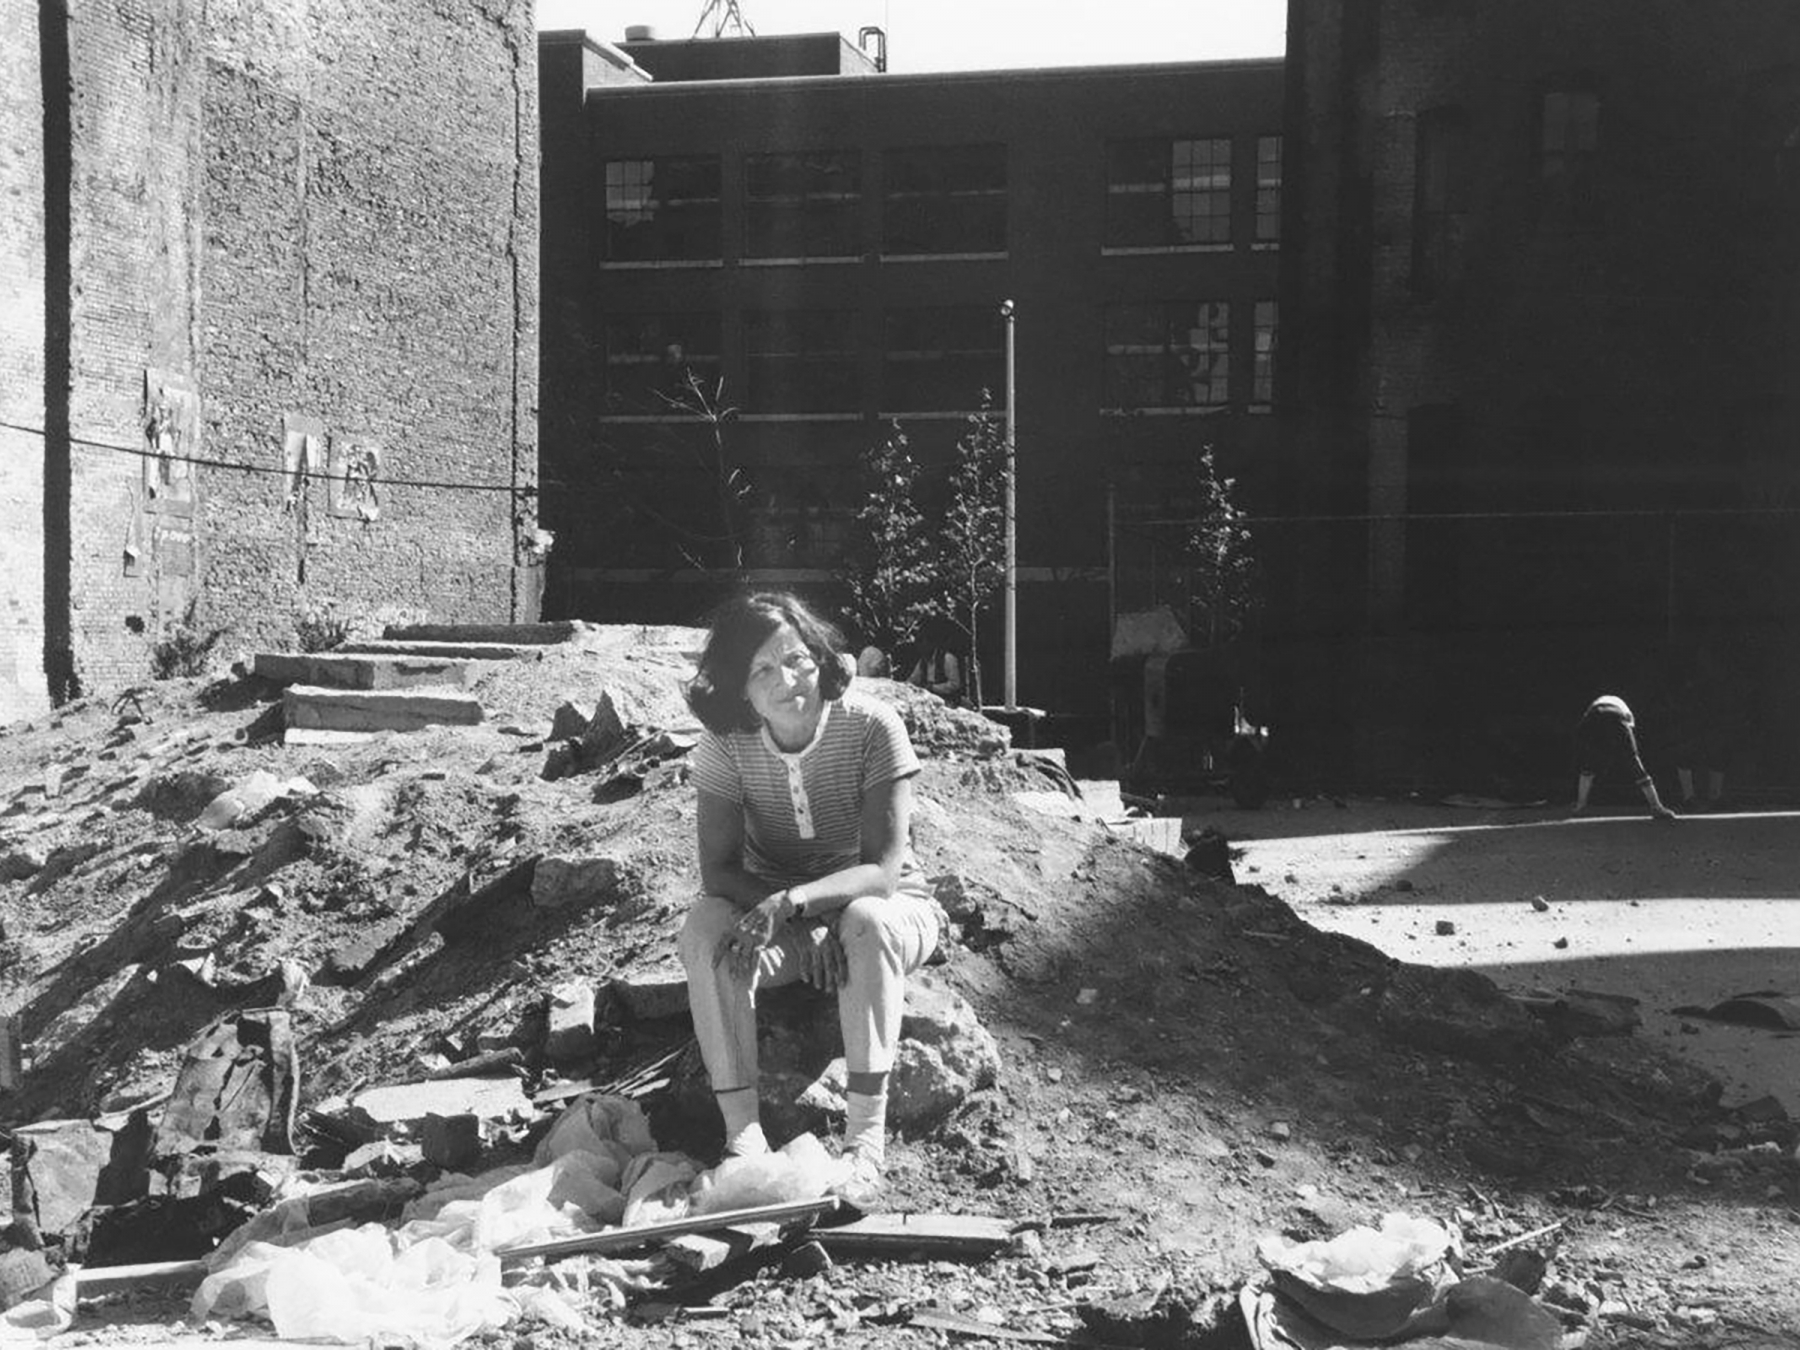 Lassnig in the Lower East Village, c. 1969.
Photo: Maria Lassnig. Archive of the Maria Lassnig Foundation.